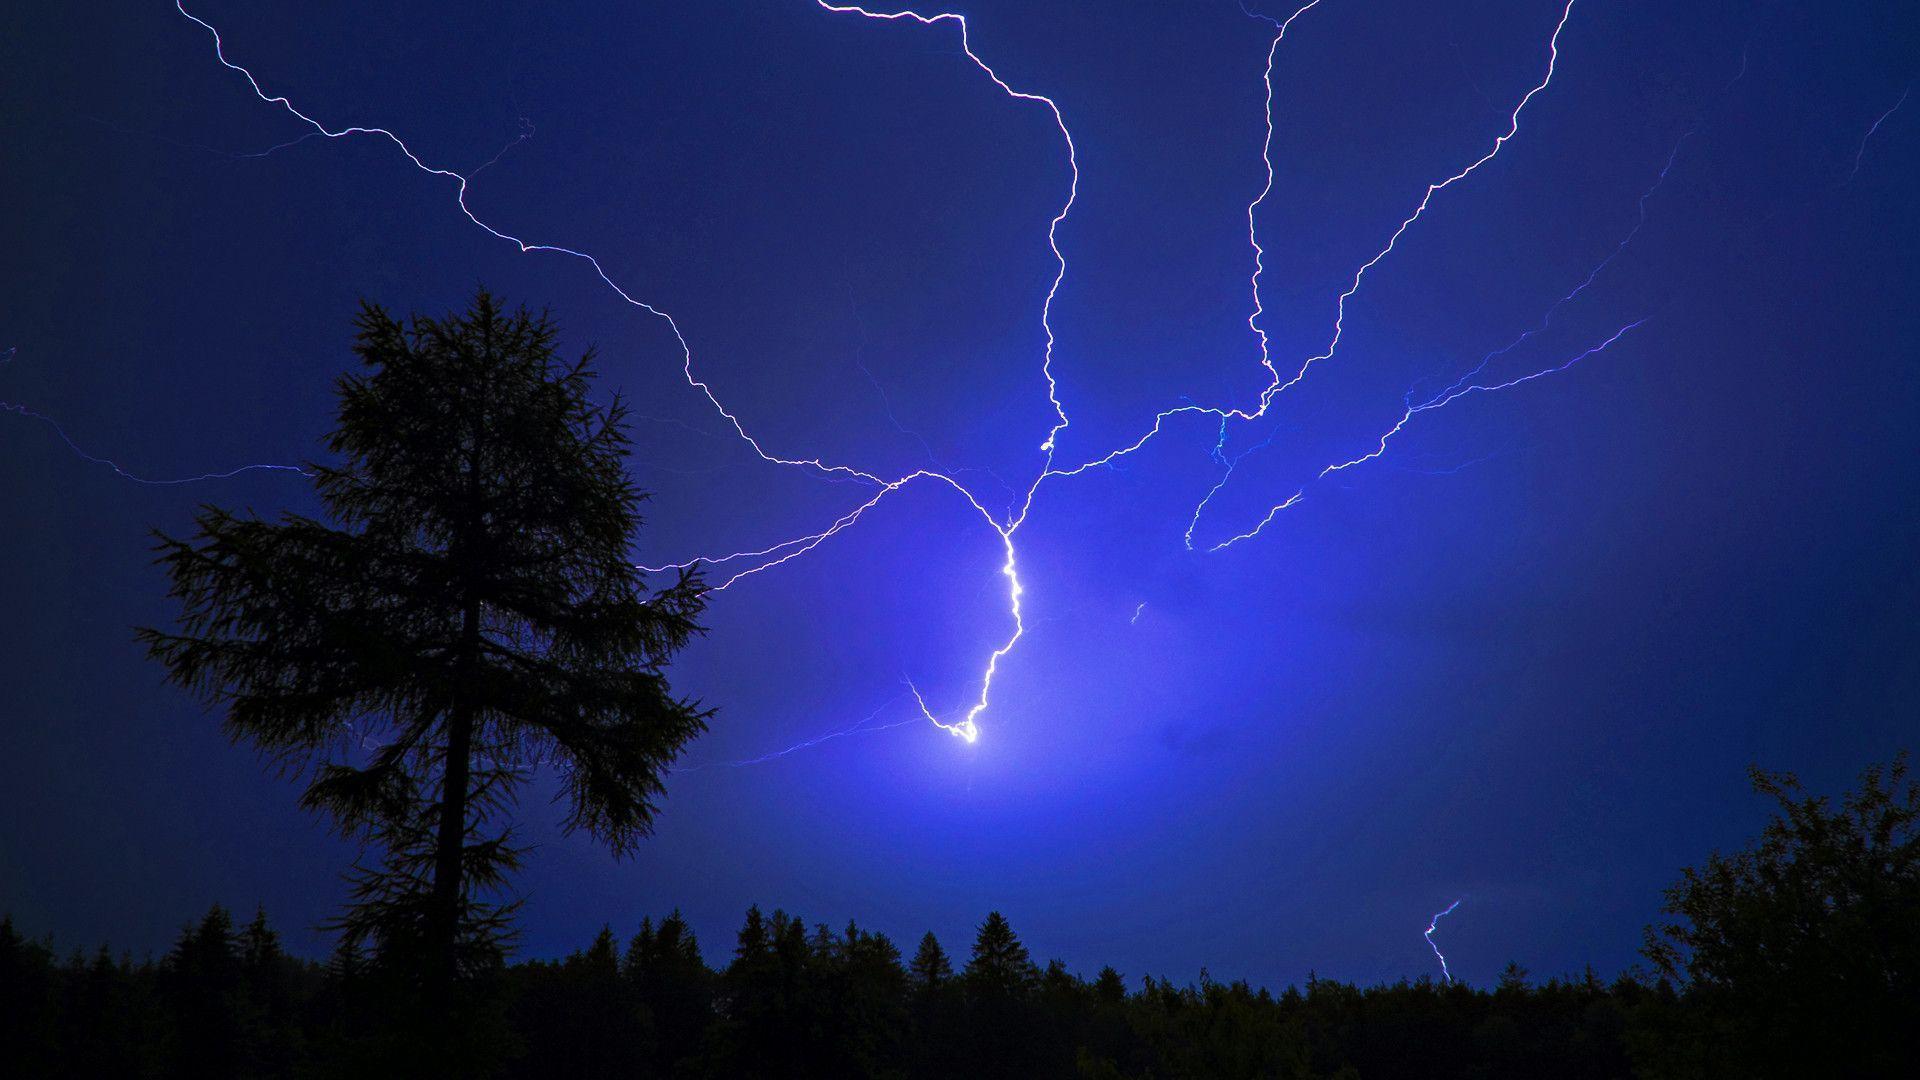 Download Free Thunderstorm Wallpaper 4415 1920x1080 px High